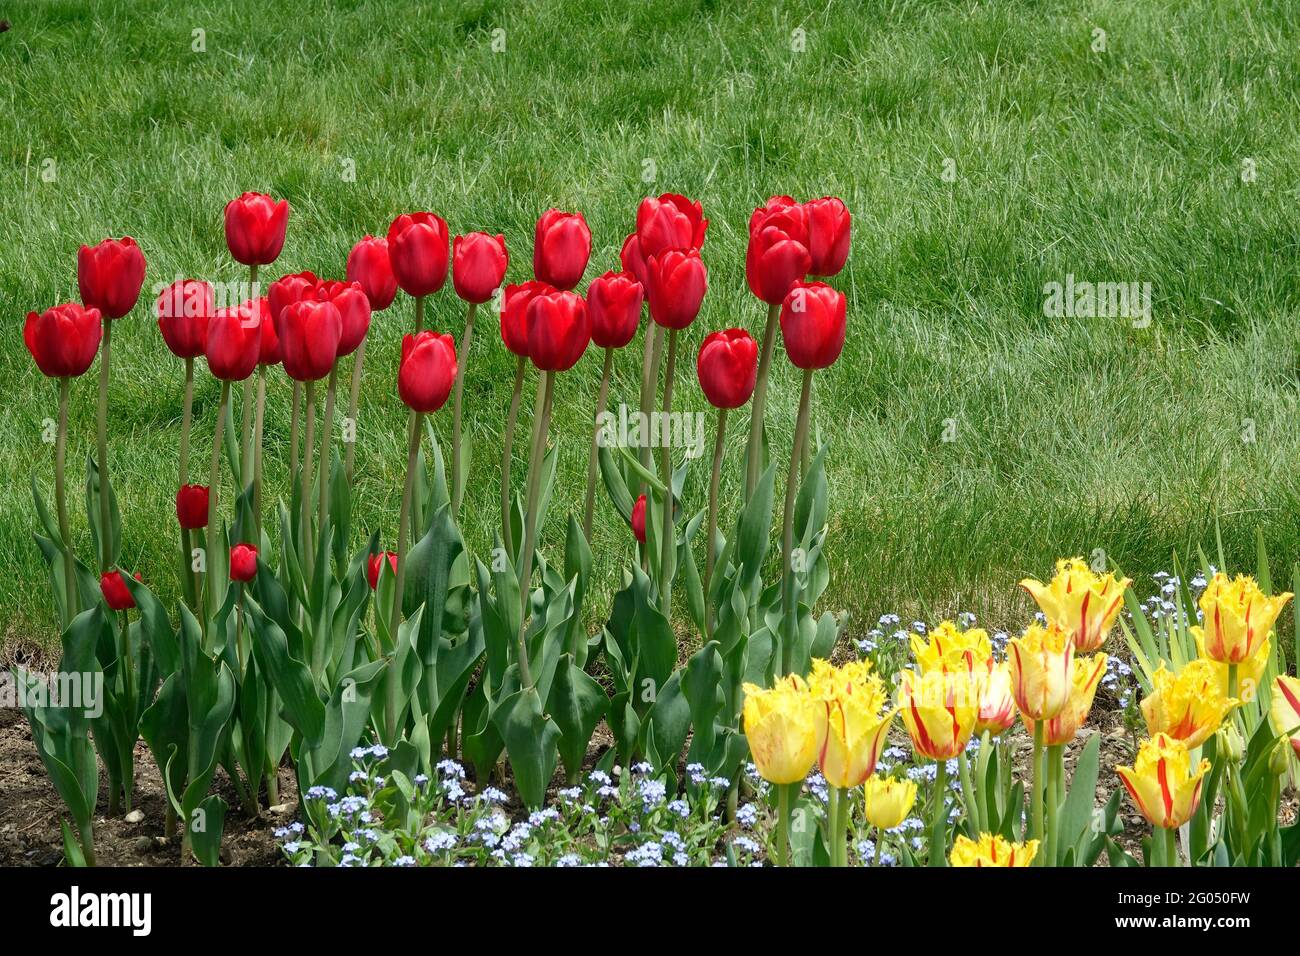 Red and Tall Heartbreaker Tulips Alongside Yellow and Red Striped Fringed Petal Party Clown Tulips Stock Photo